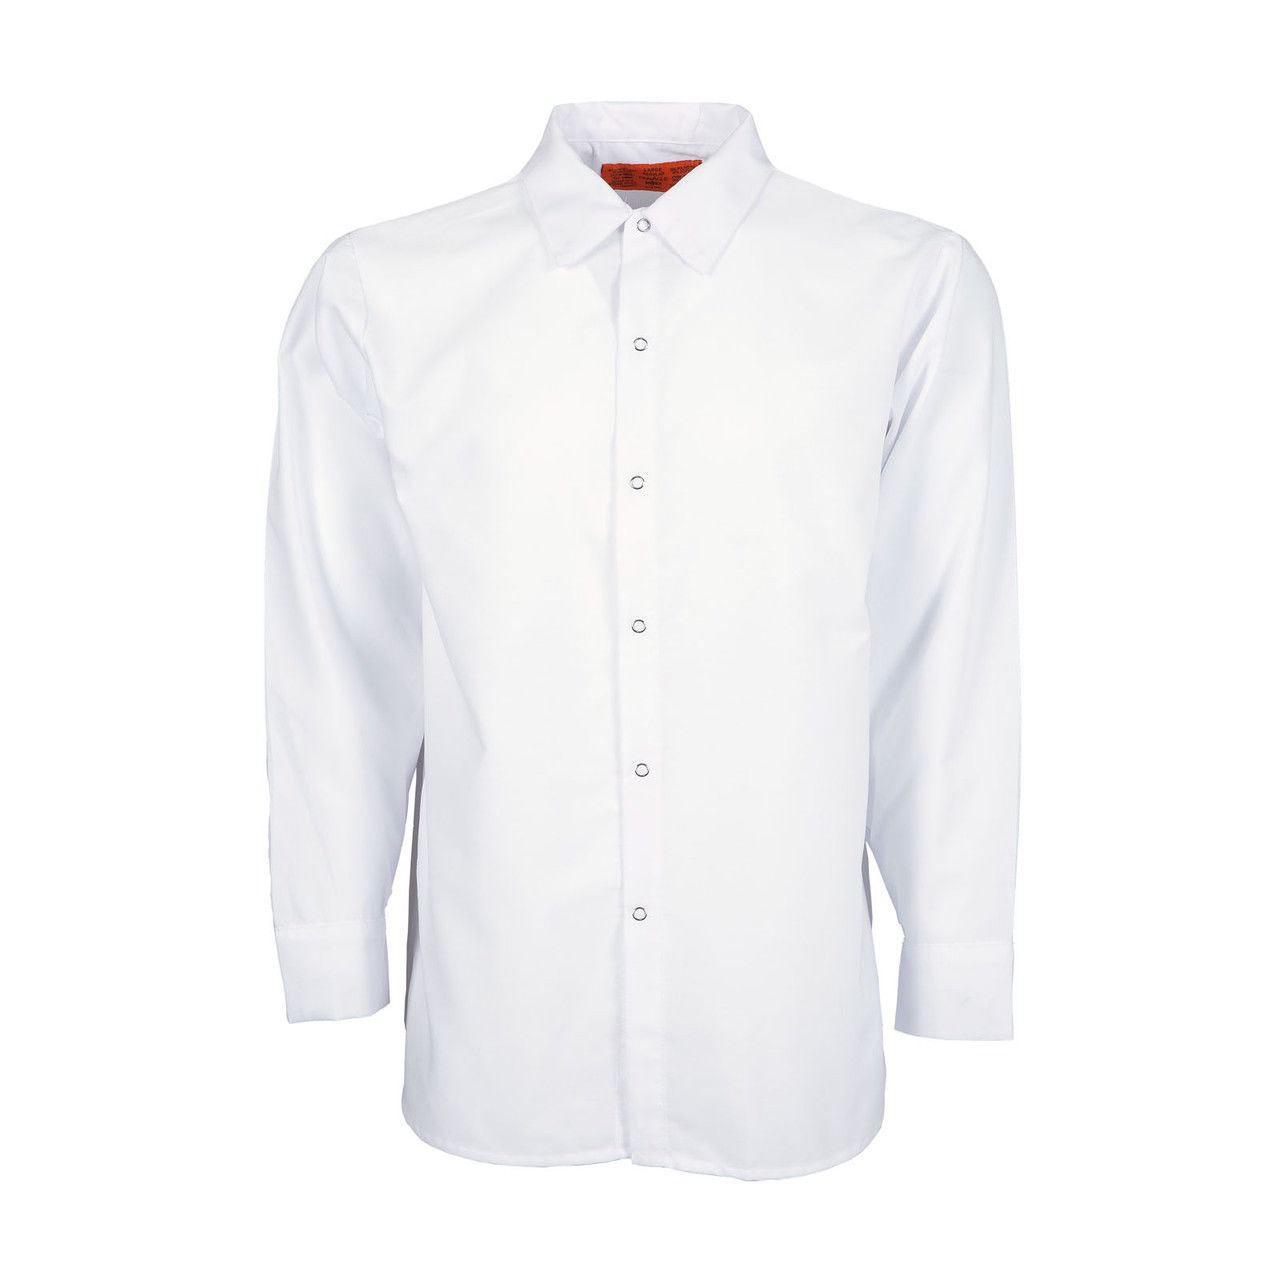 What sizes are available for white work shirts mens?